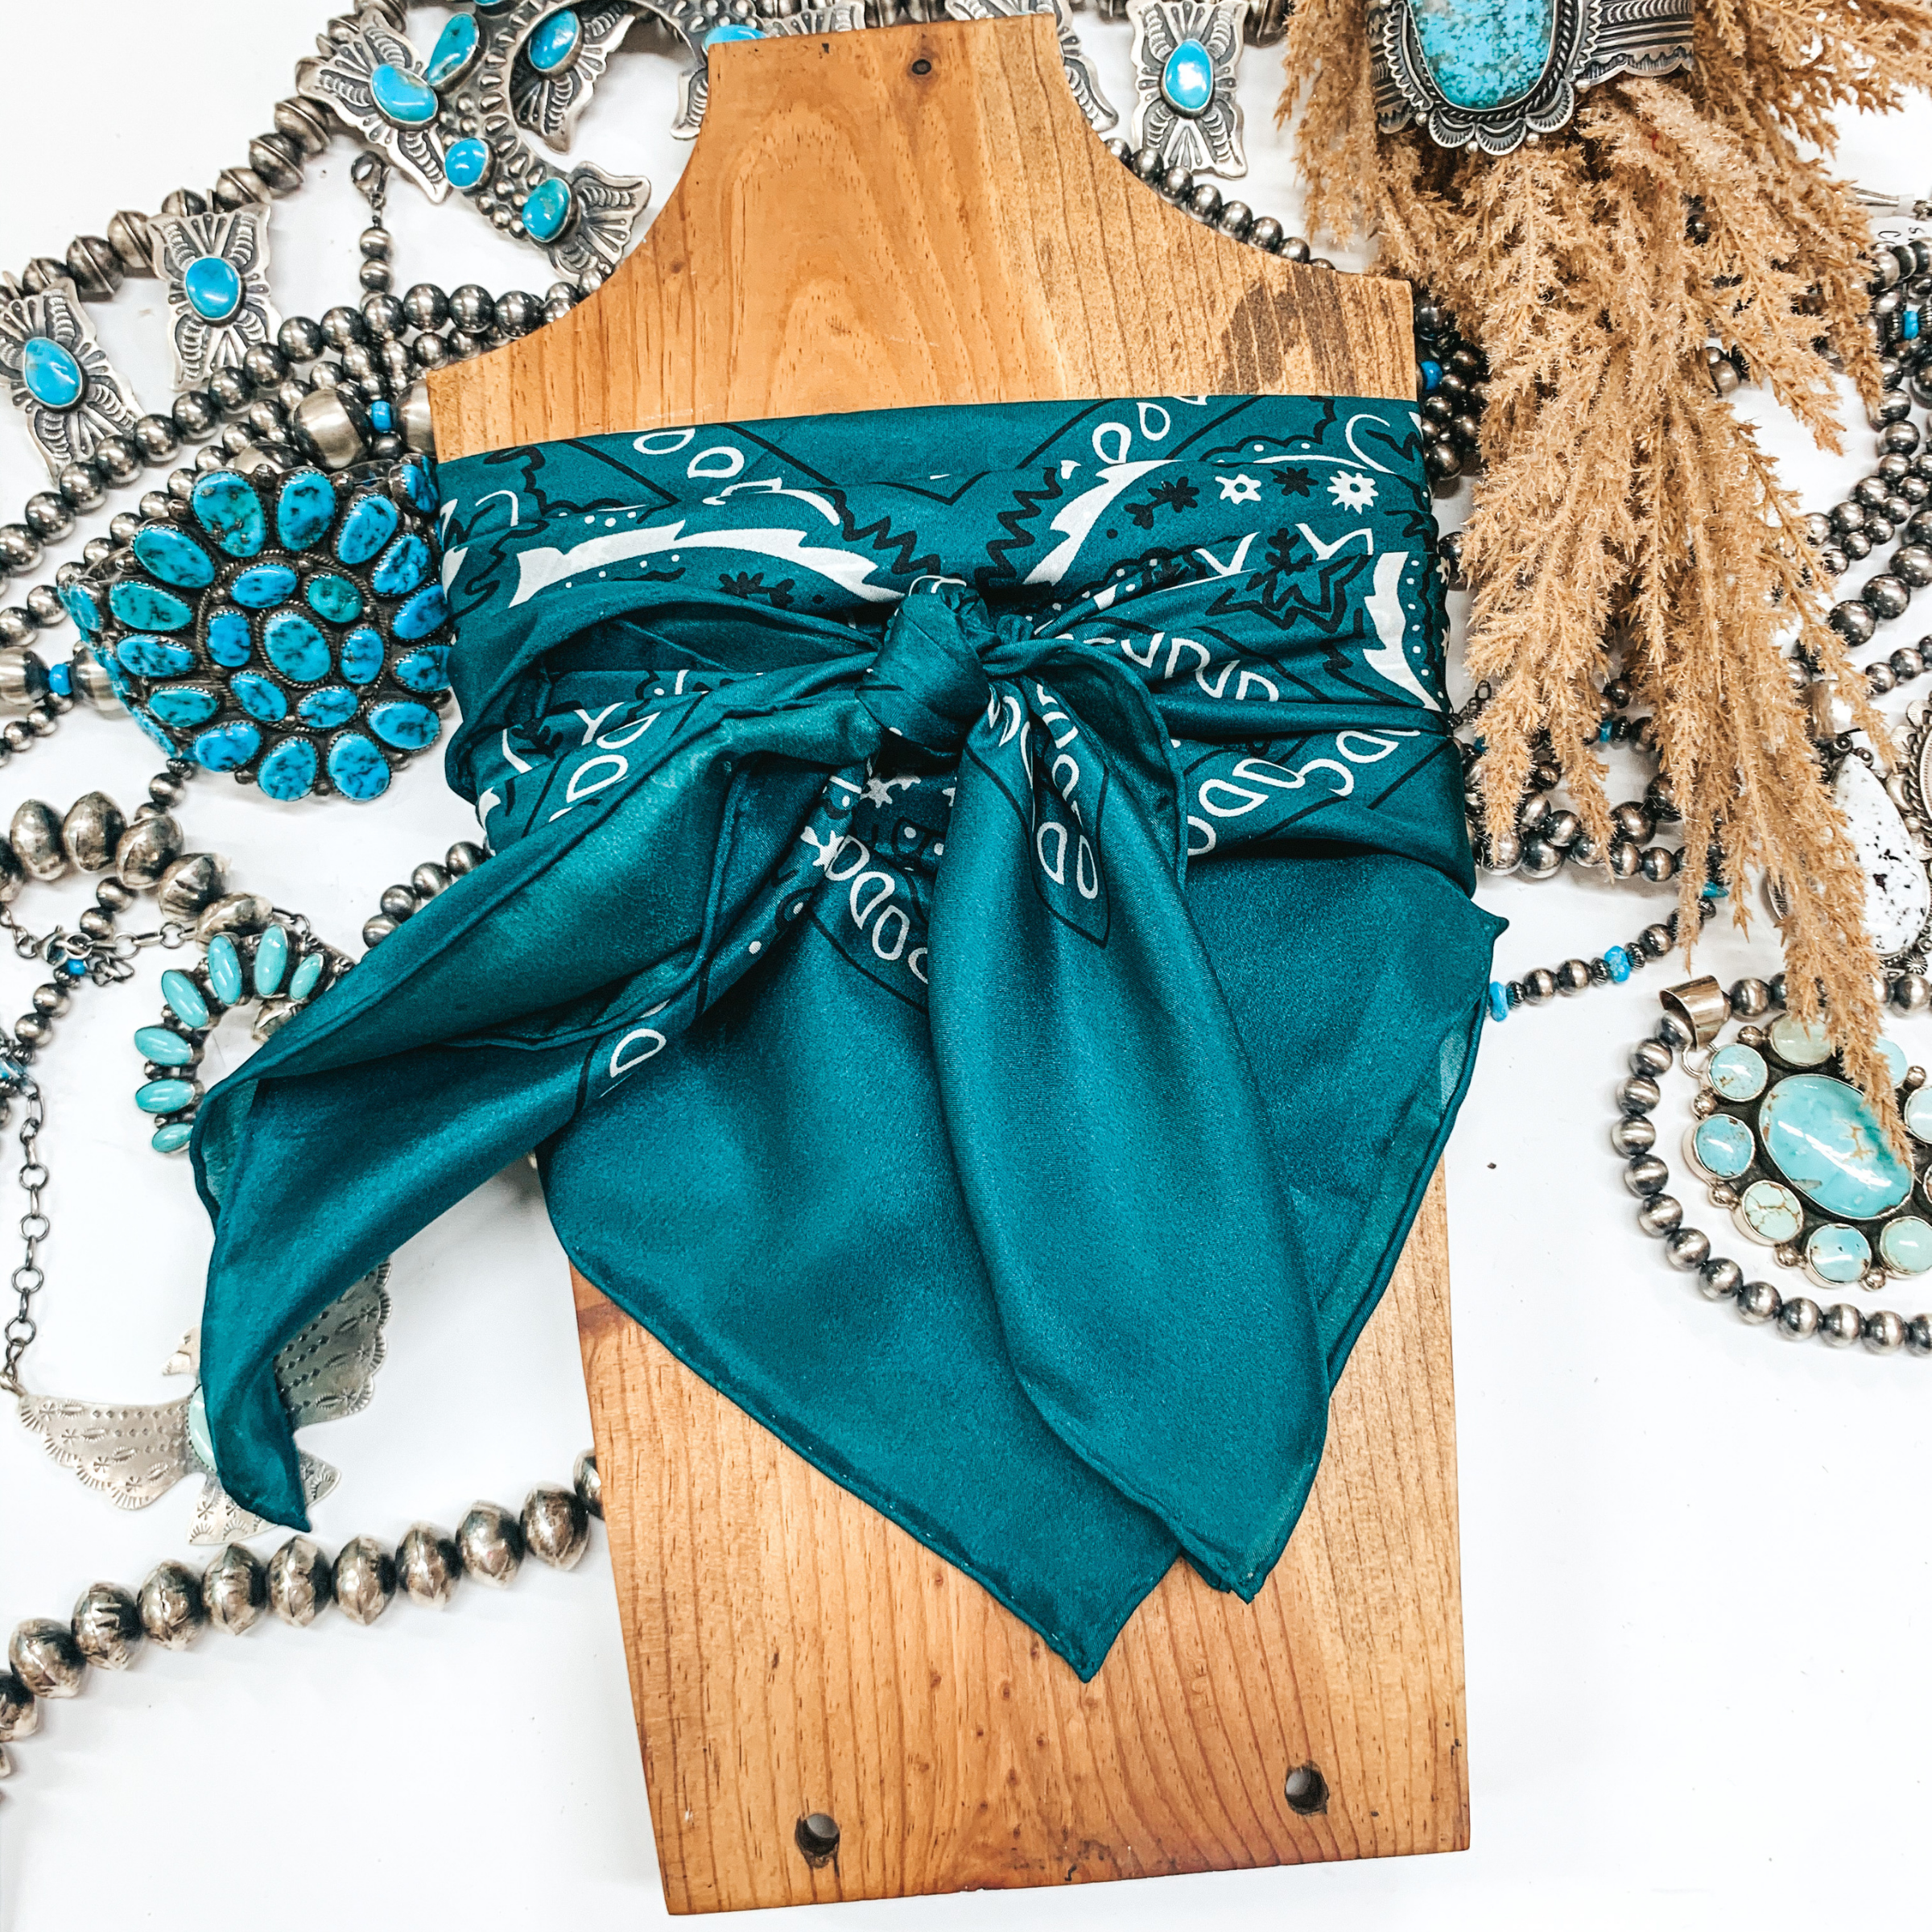 Bandana Wild Rag in Forest Green - Giddy Up Glamour Boutique